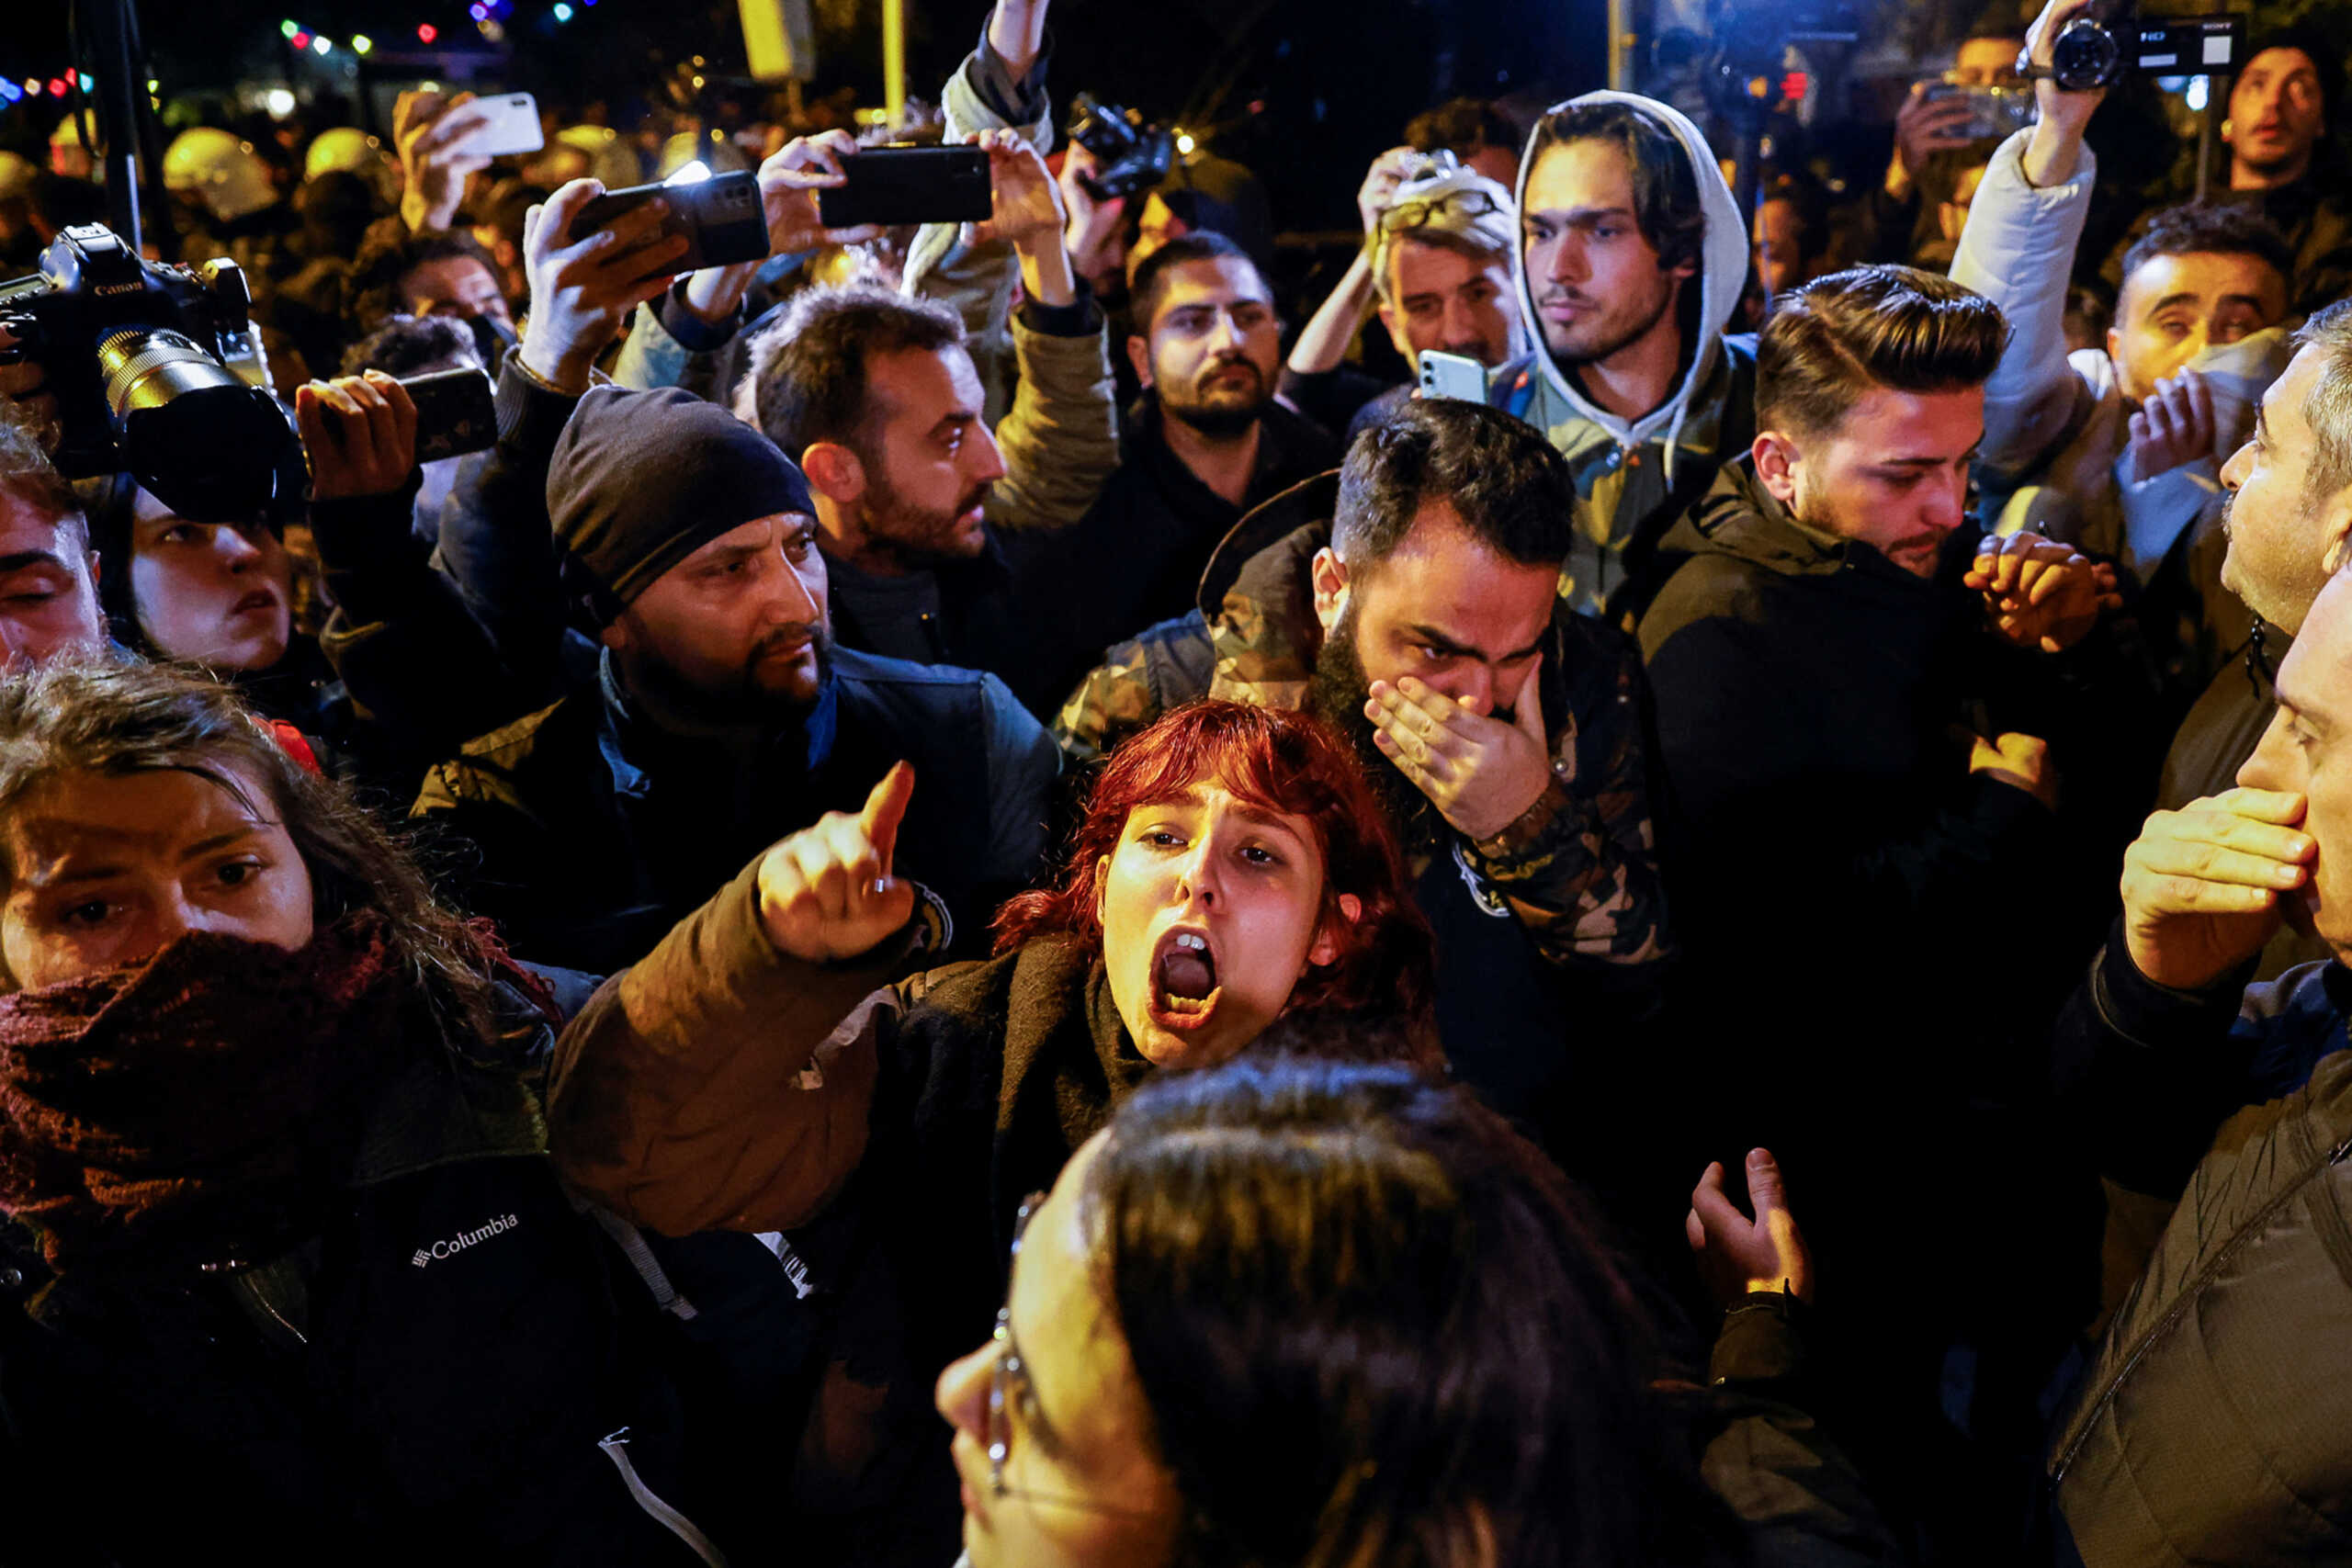 Police used pepper spray at a rally marking International Women’s Day in Istanbul